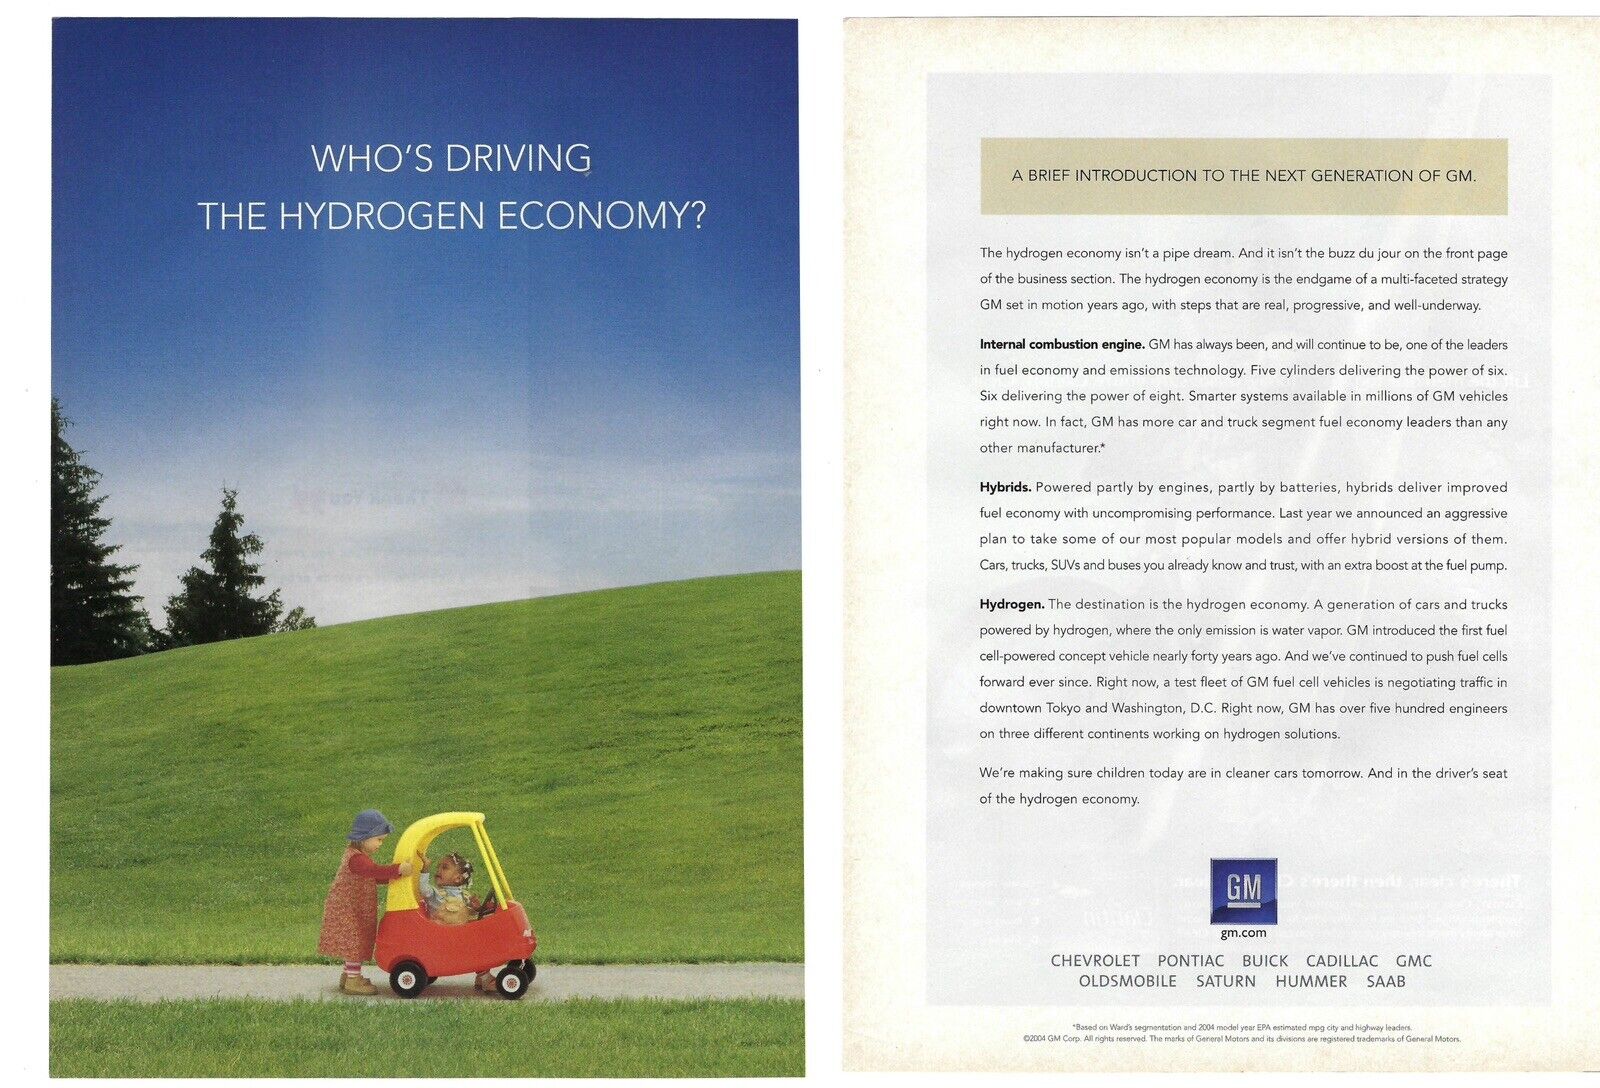 2004 GM General Motors Who’s Driving The Hydrogen Economy? Retro Print Ad/Poster